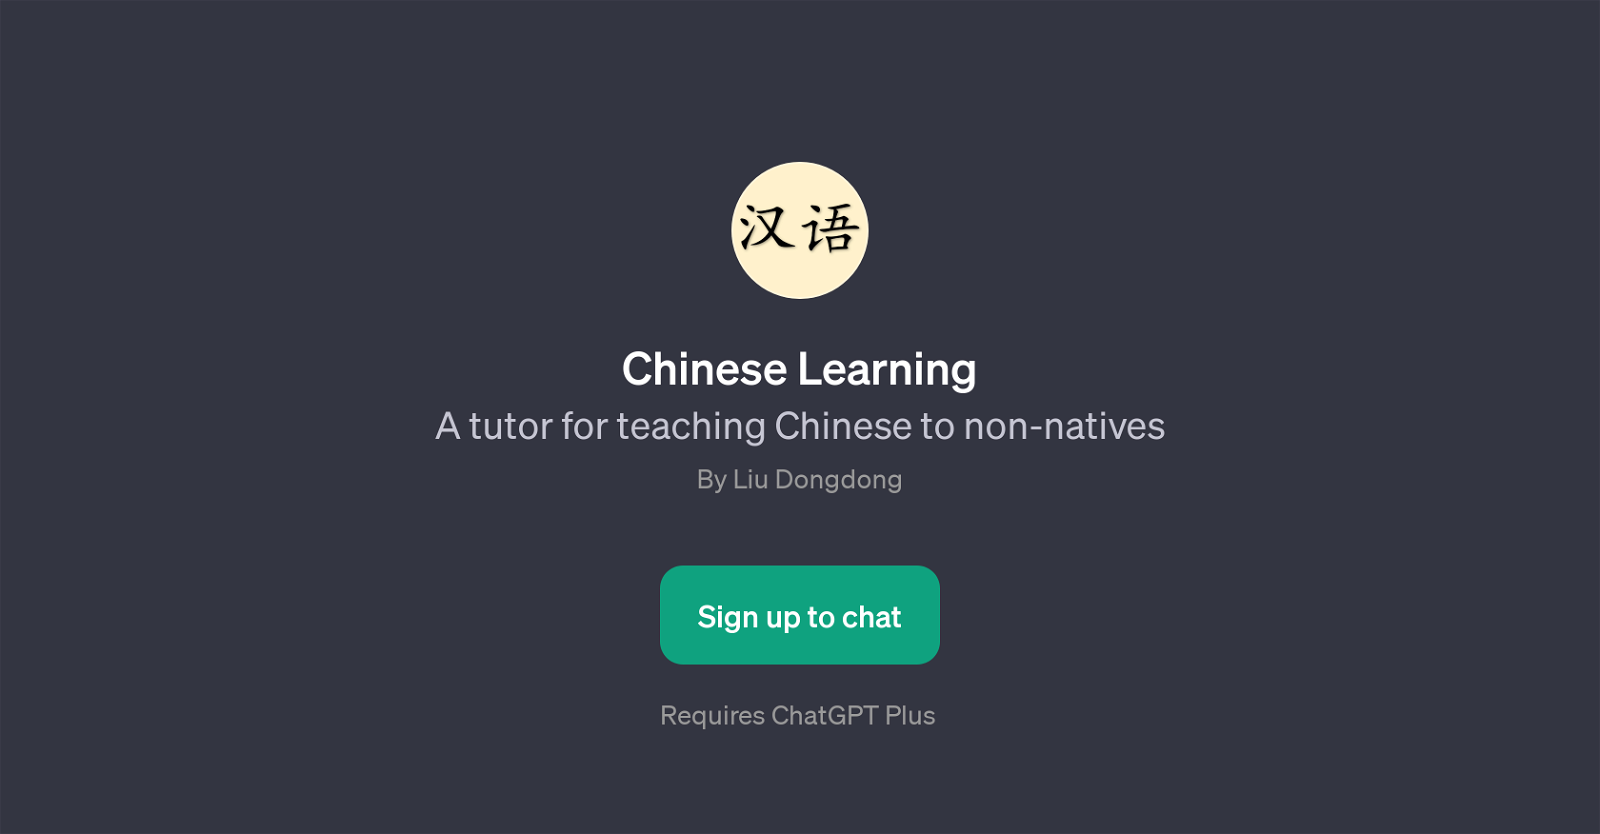 Chinese Learning website